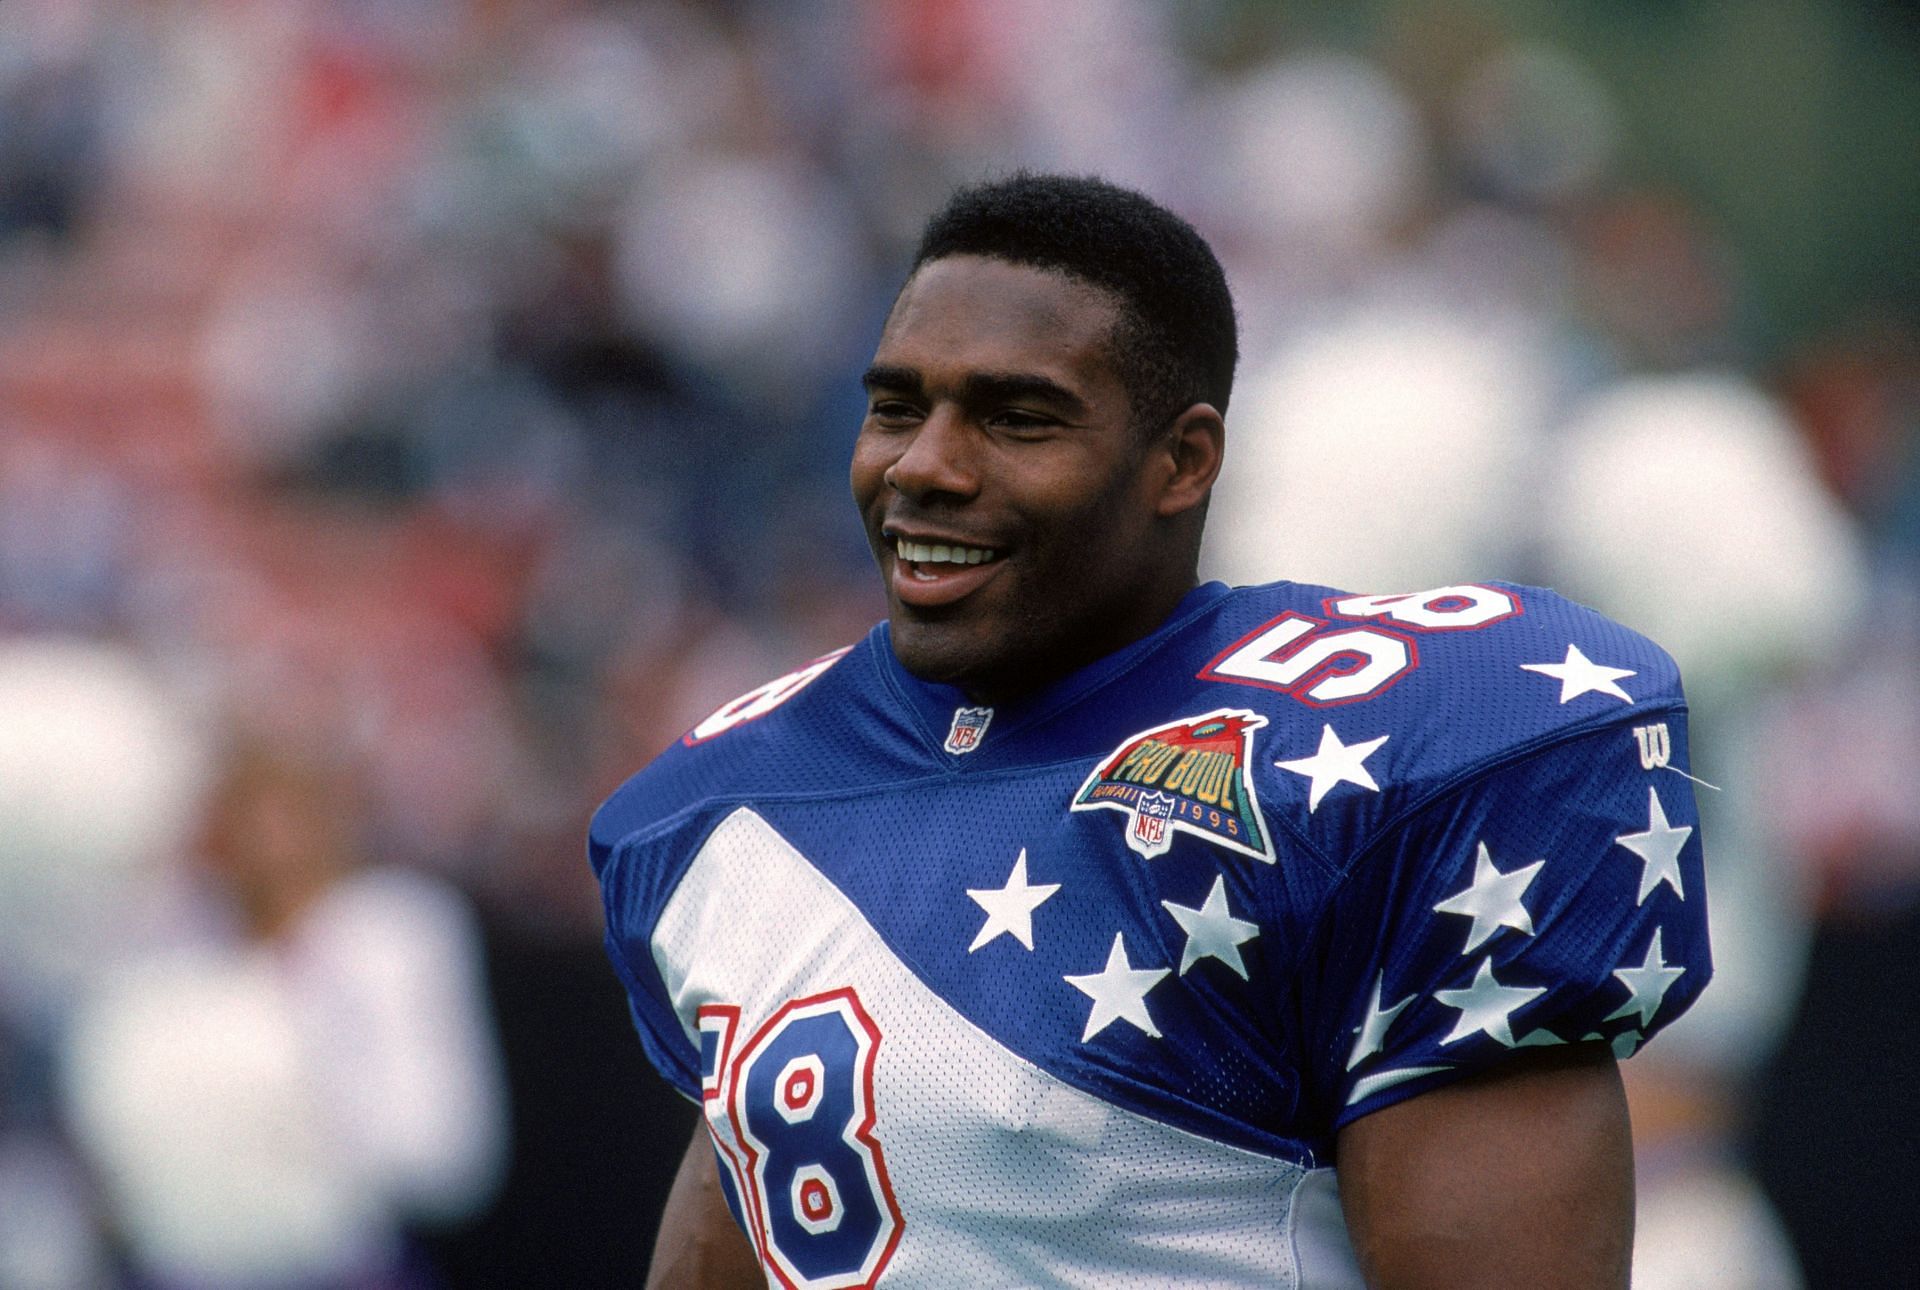 Jessie Tuggle at the 1995 Pro Bowl